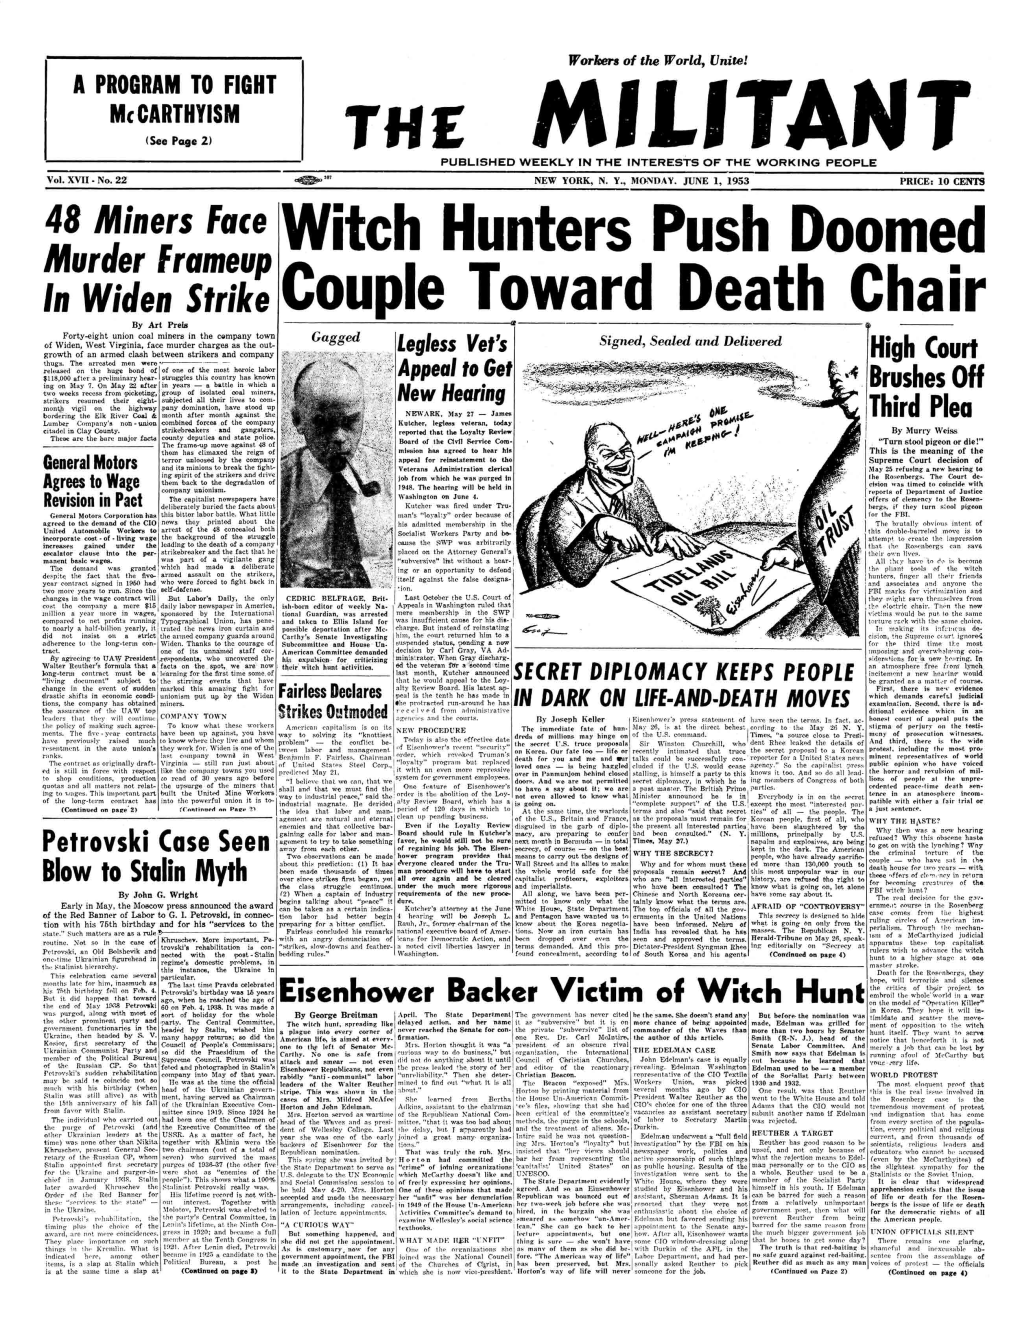 Witch Hunters Push Doomed Couple Toward Death Chair